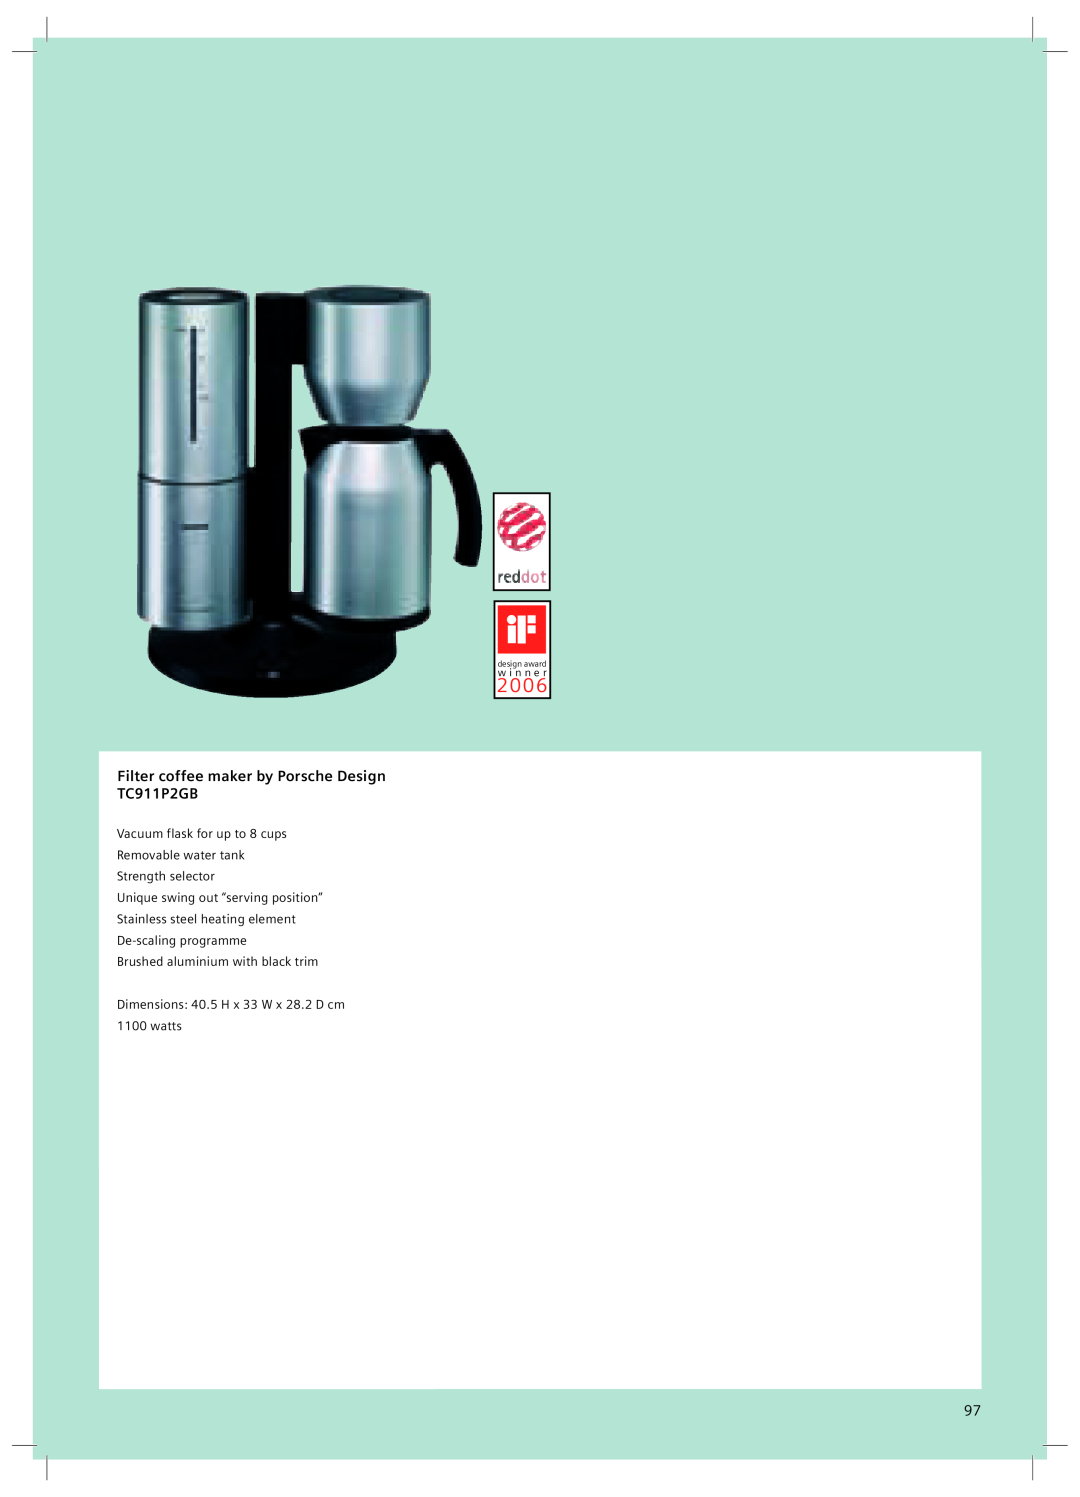 Nespresso TK30N01GB 2 0 0, Filter coffee maker by Porsche Design TC911P2GB, Vacuum flask for up to 8 cups, w i n n e r 